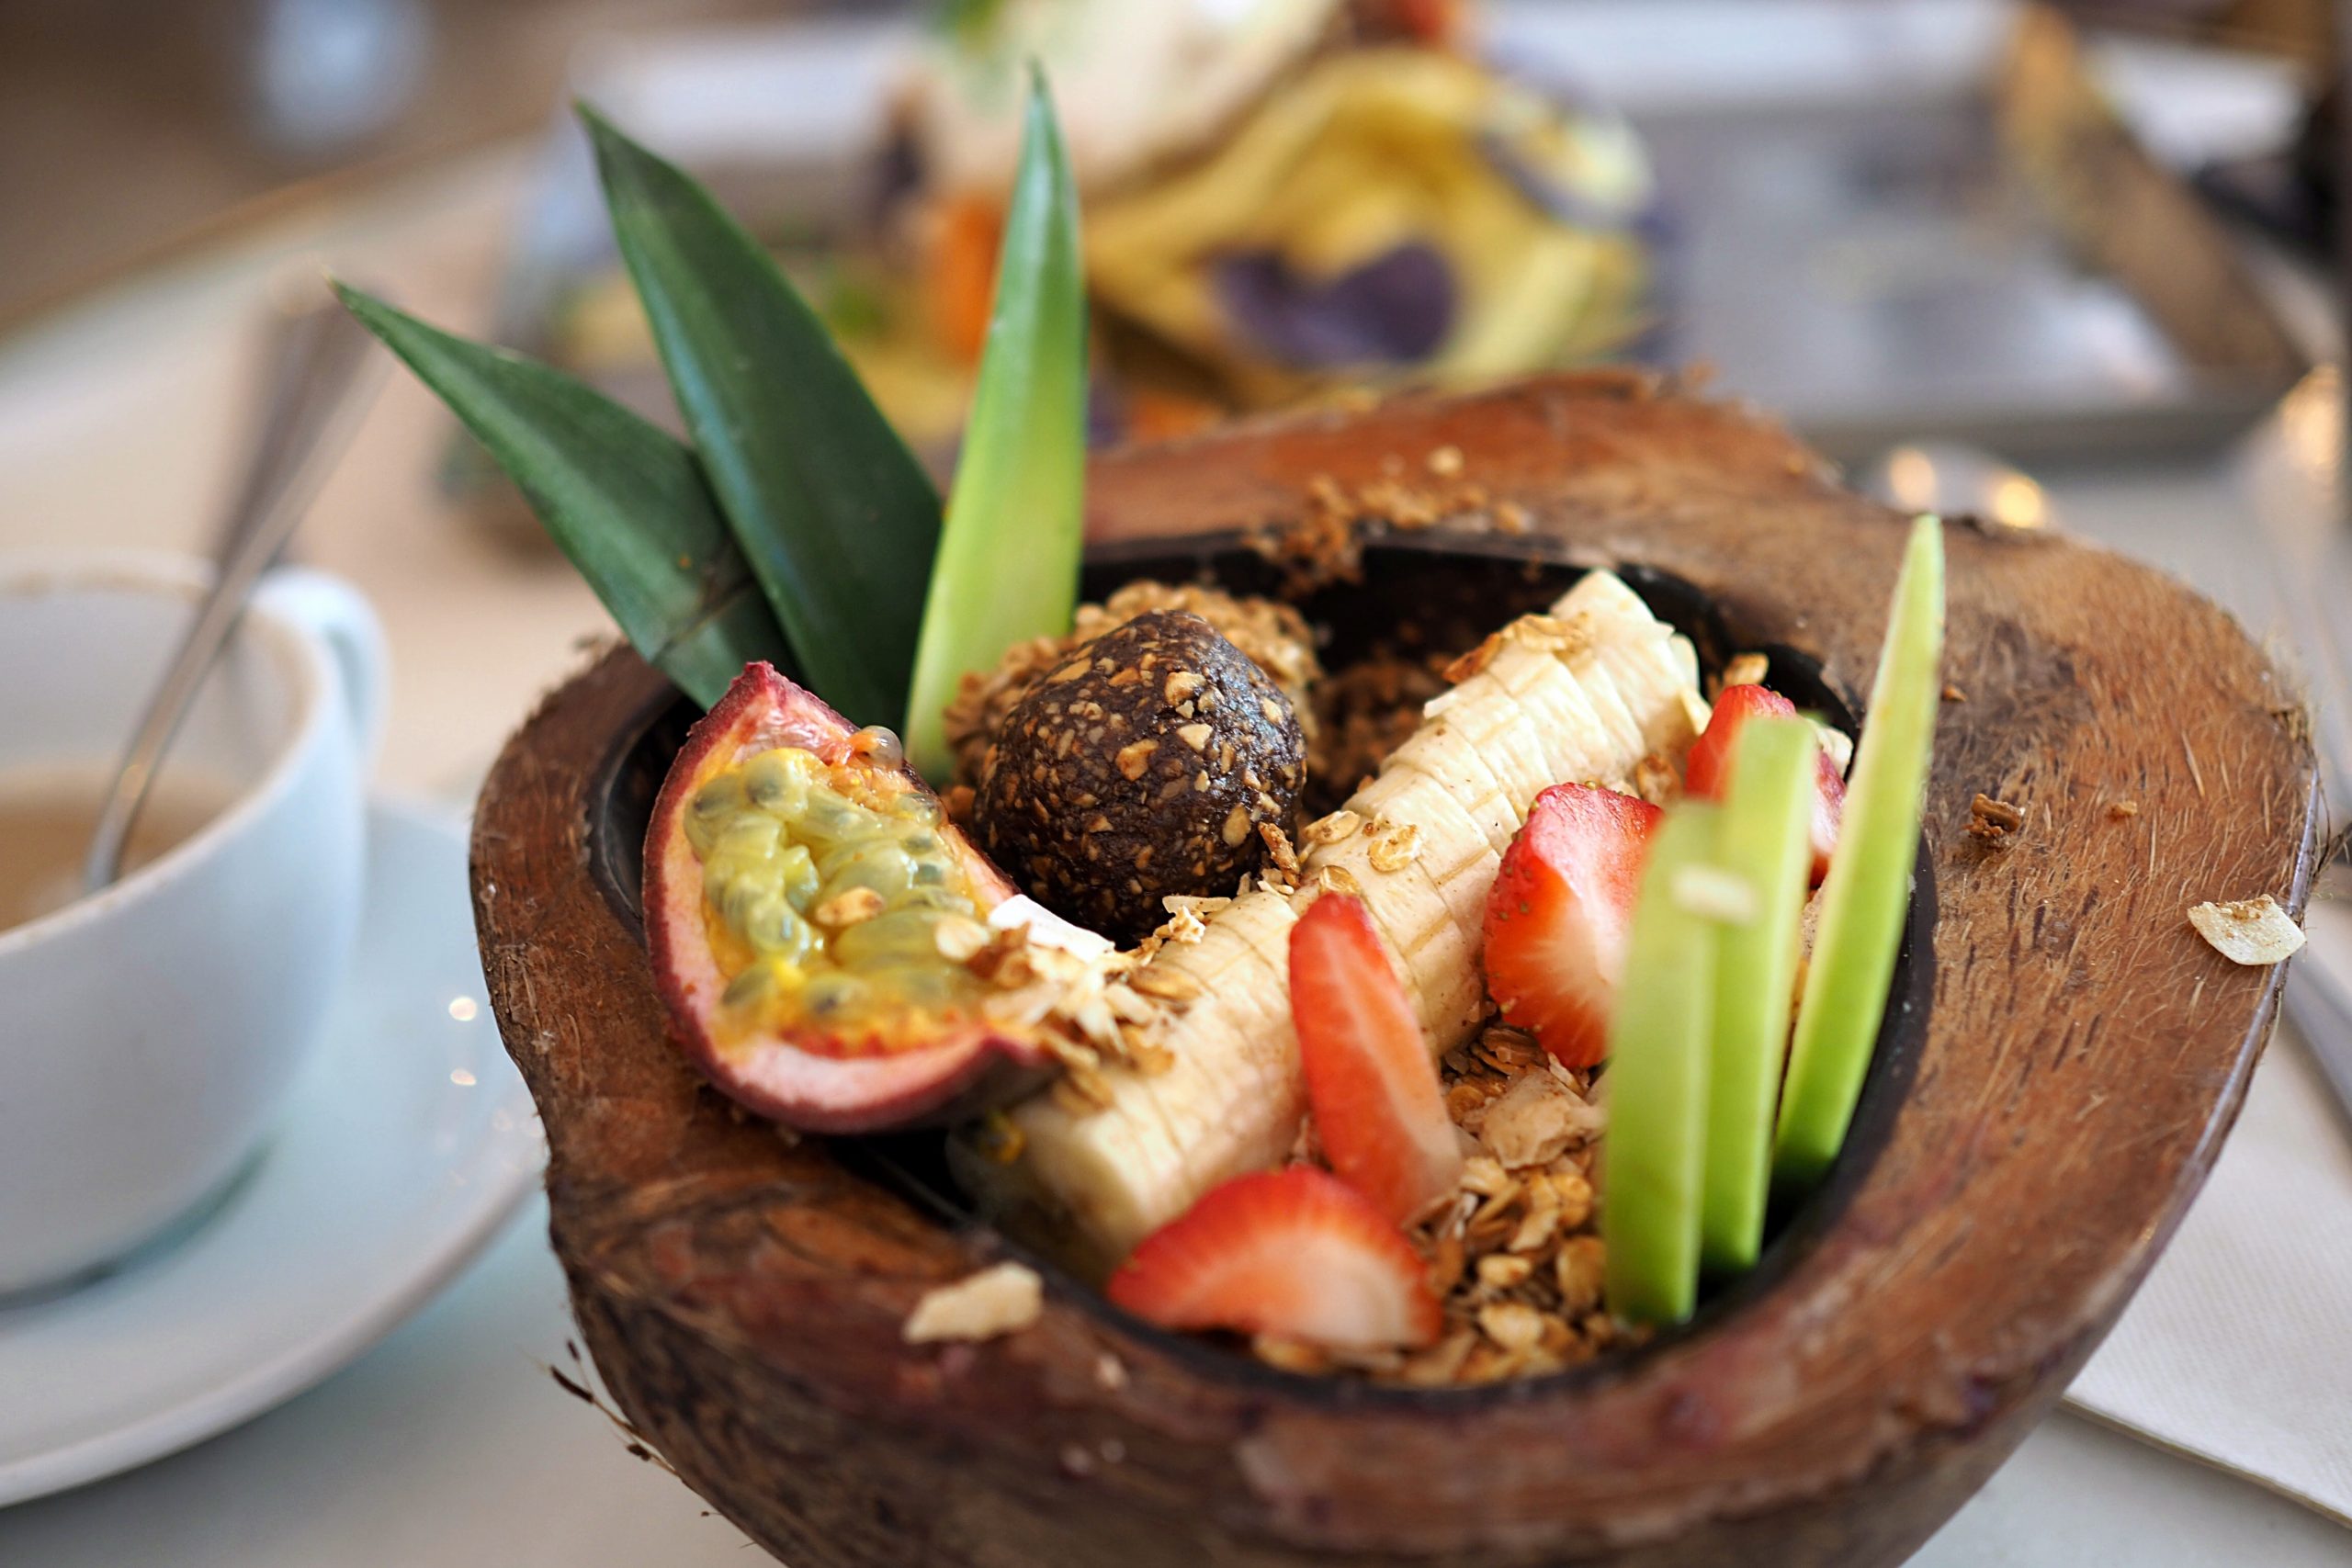 Coconut bowl filled with fresh fruits